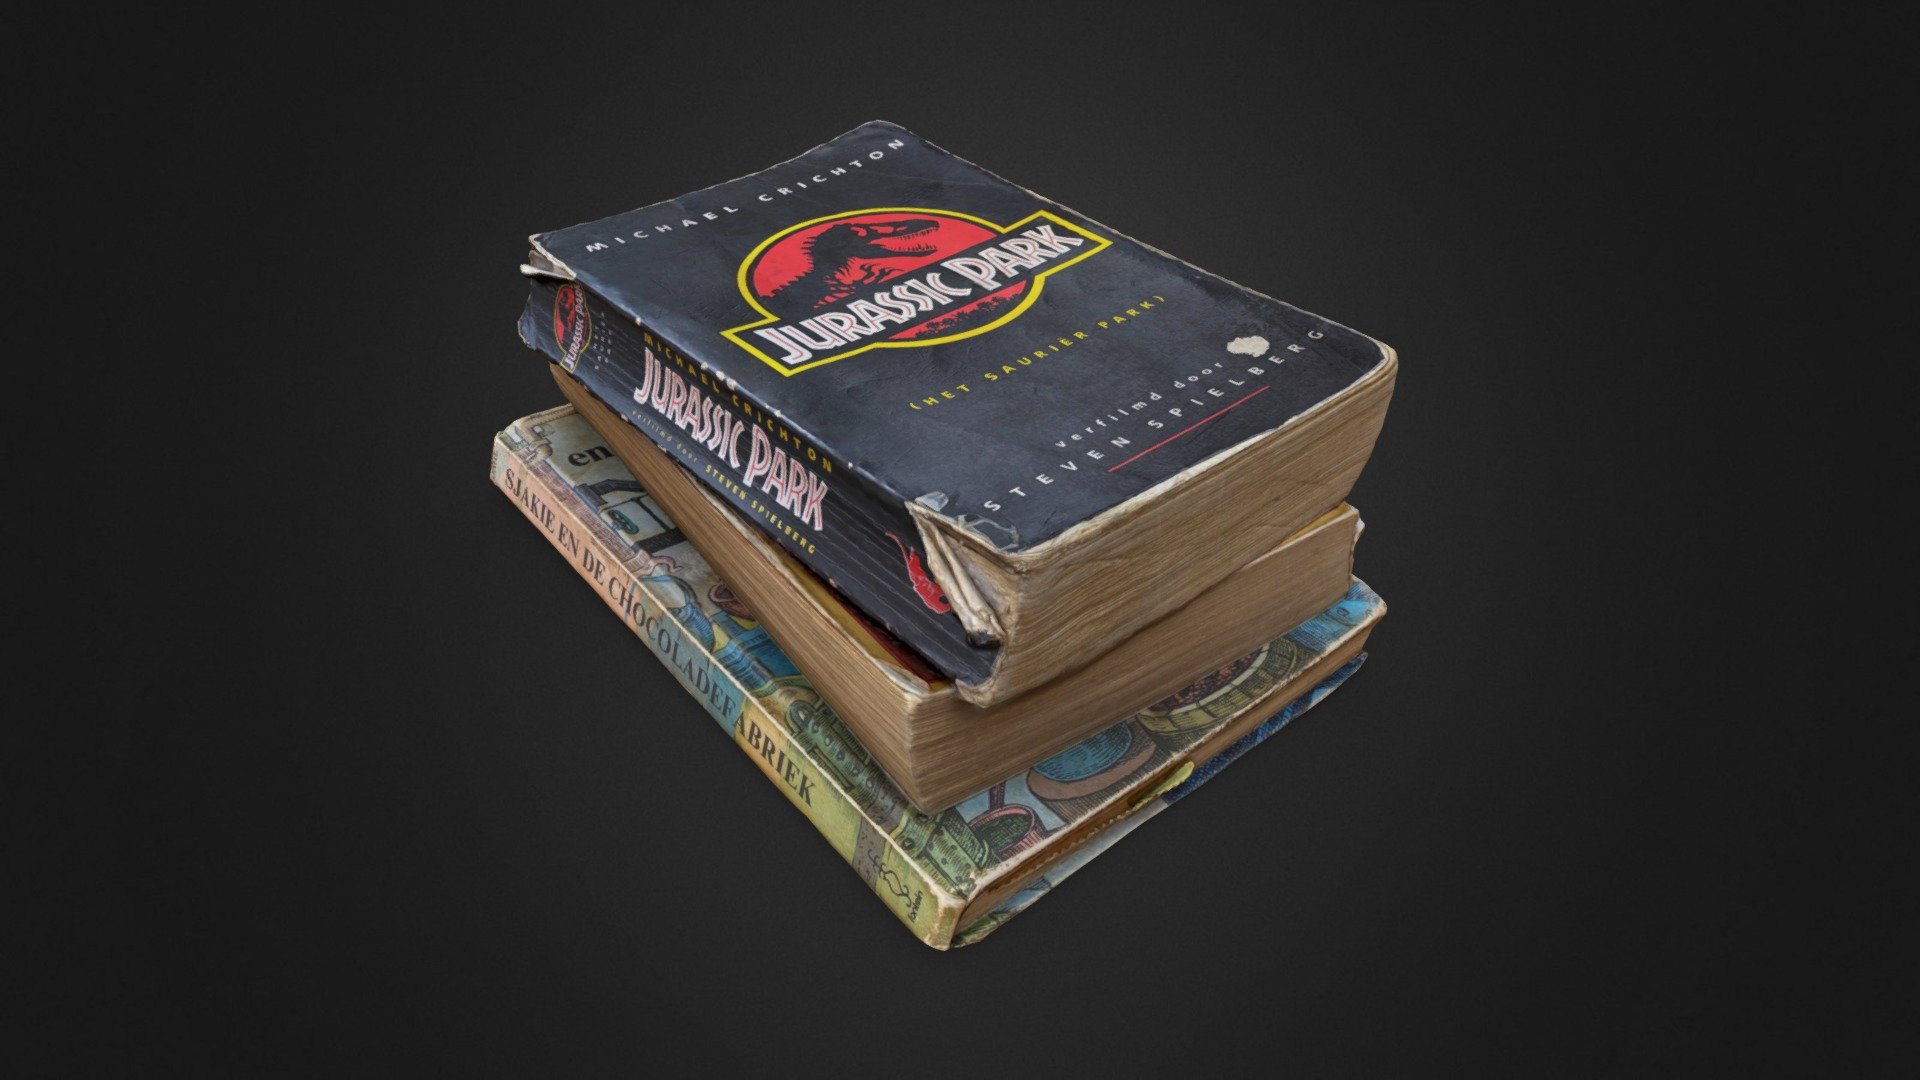 Three books that somehow survived my childhood despite my attempts to read them to pieces: Jurassic Park (Michael Crichton), The Neverending Story (Michael Ende) and Charlie and the Chocolate Factory (Roald Dahl).

Produced with Apple's new Object Capture photogrammetry API in macOS 12, from 45 pictures taken on an iPhone 11 3d model